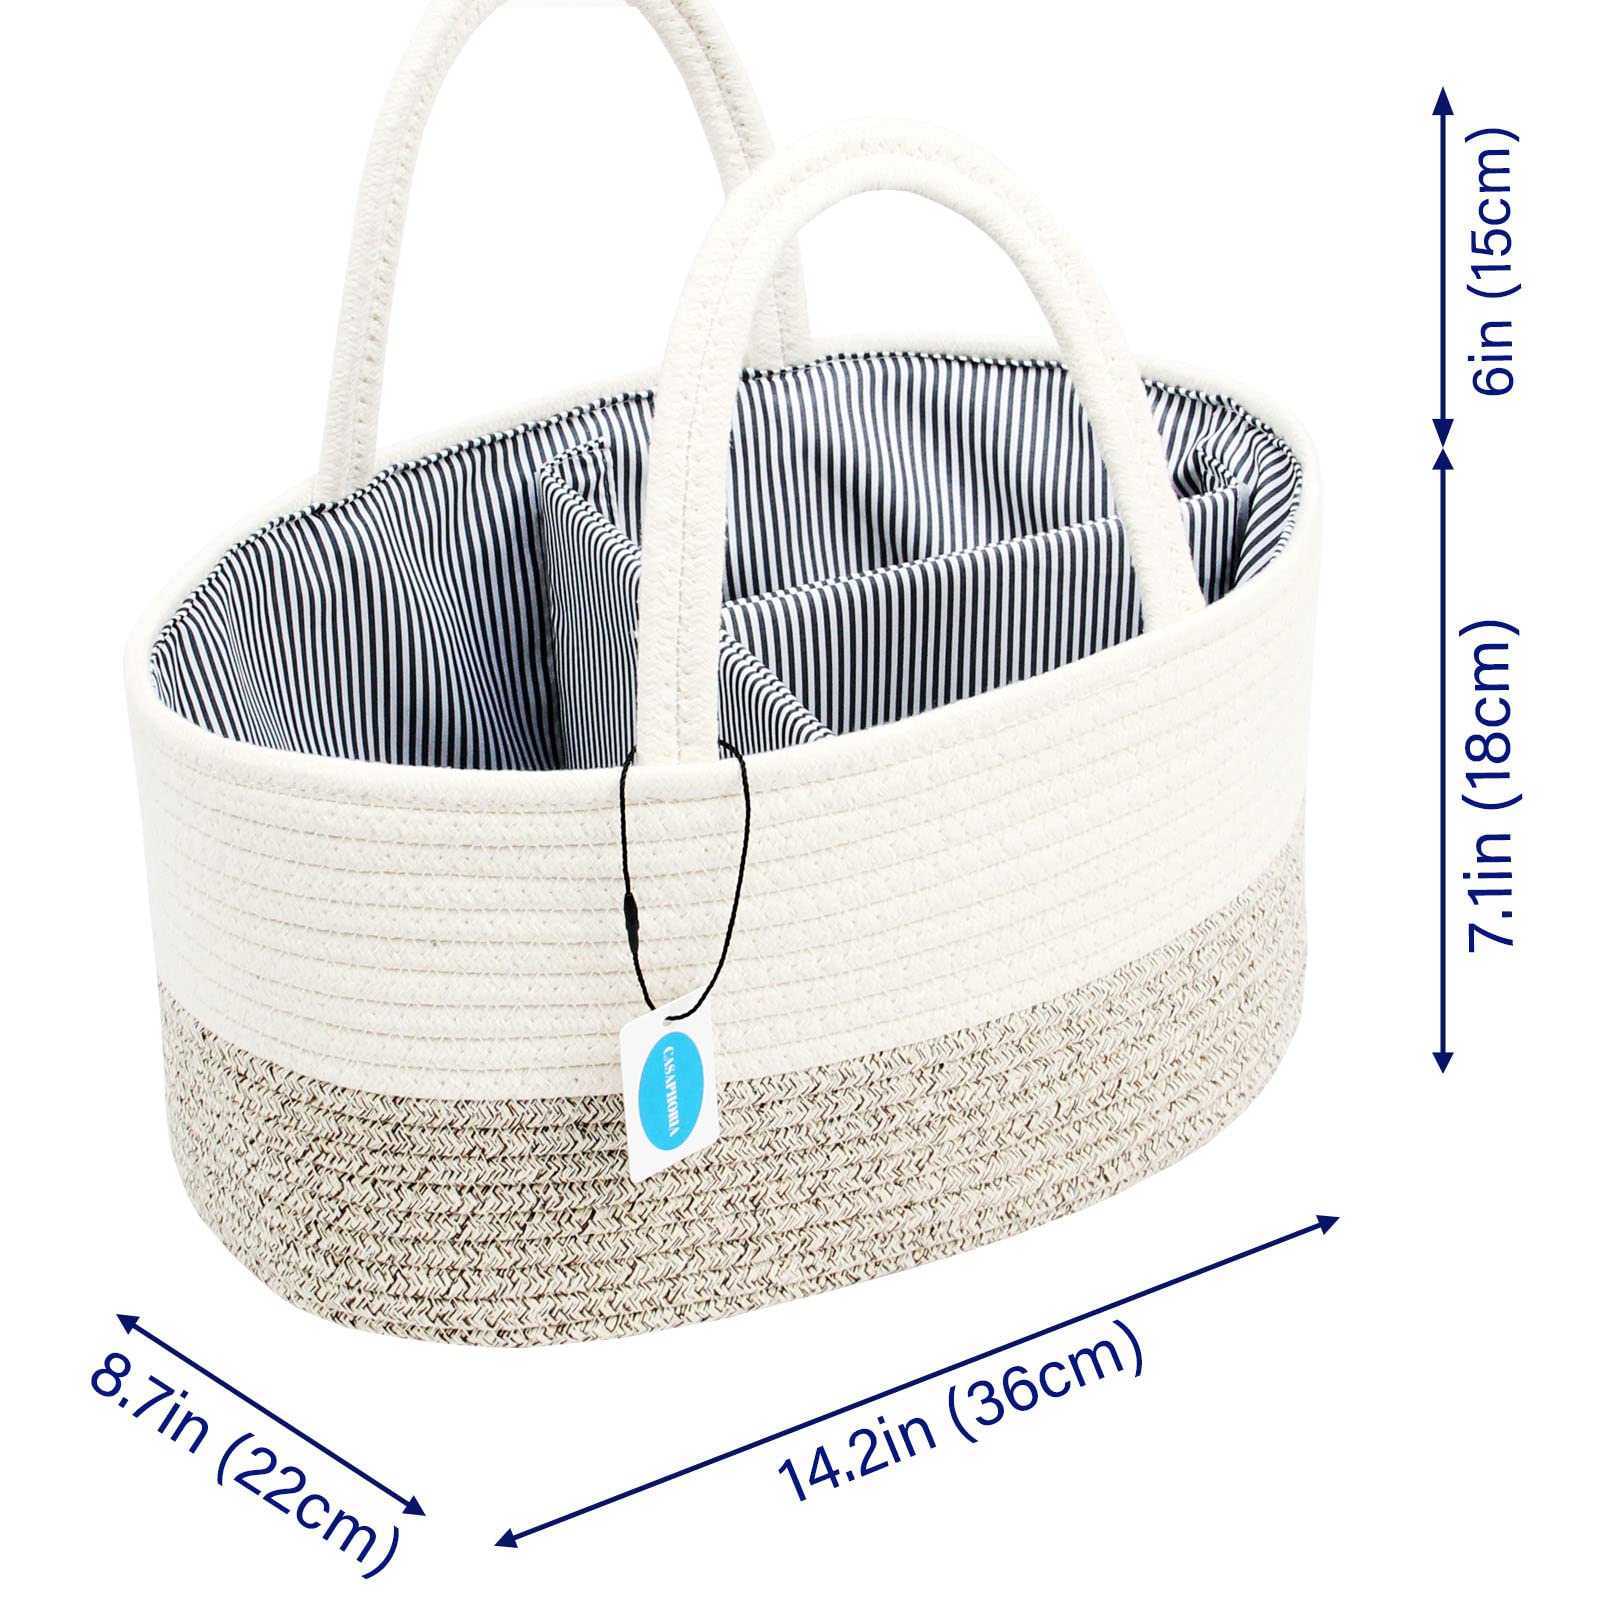 Casaphoria Diaper Caddy Organize,Cotton Rope Diaper Basket Caddy Baskets for Storage,100% Cotton Car Diaper Organizer with Removable Inserts,light brown(14.2''×8.7''×7.1'')